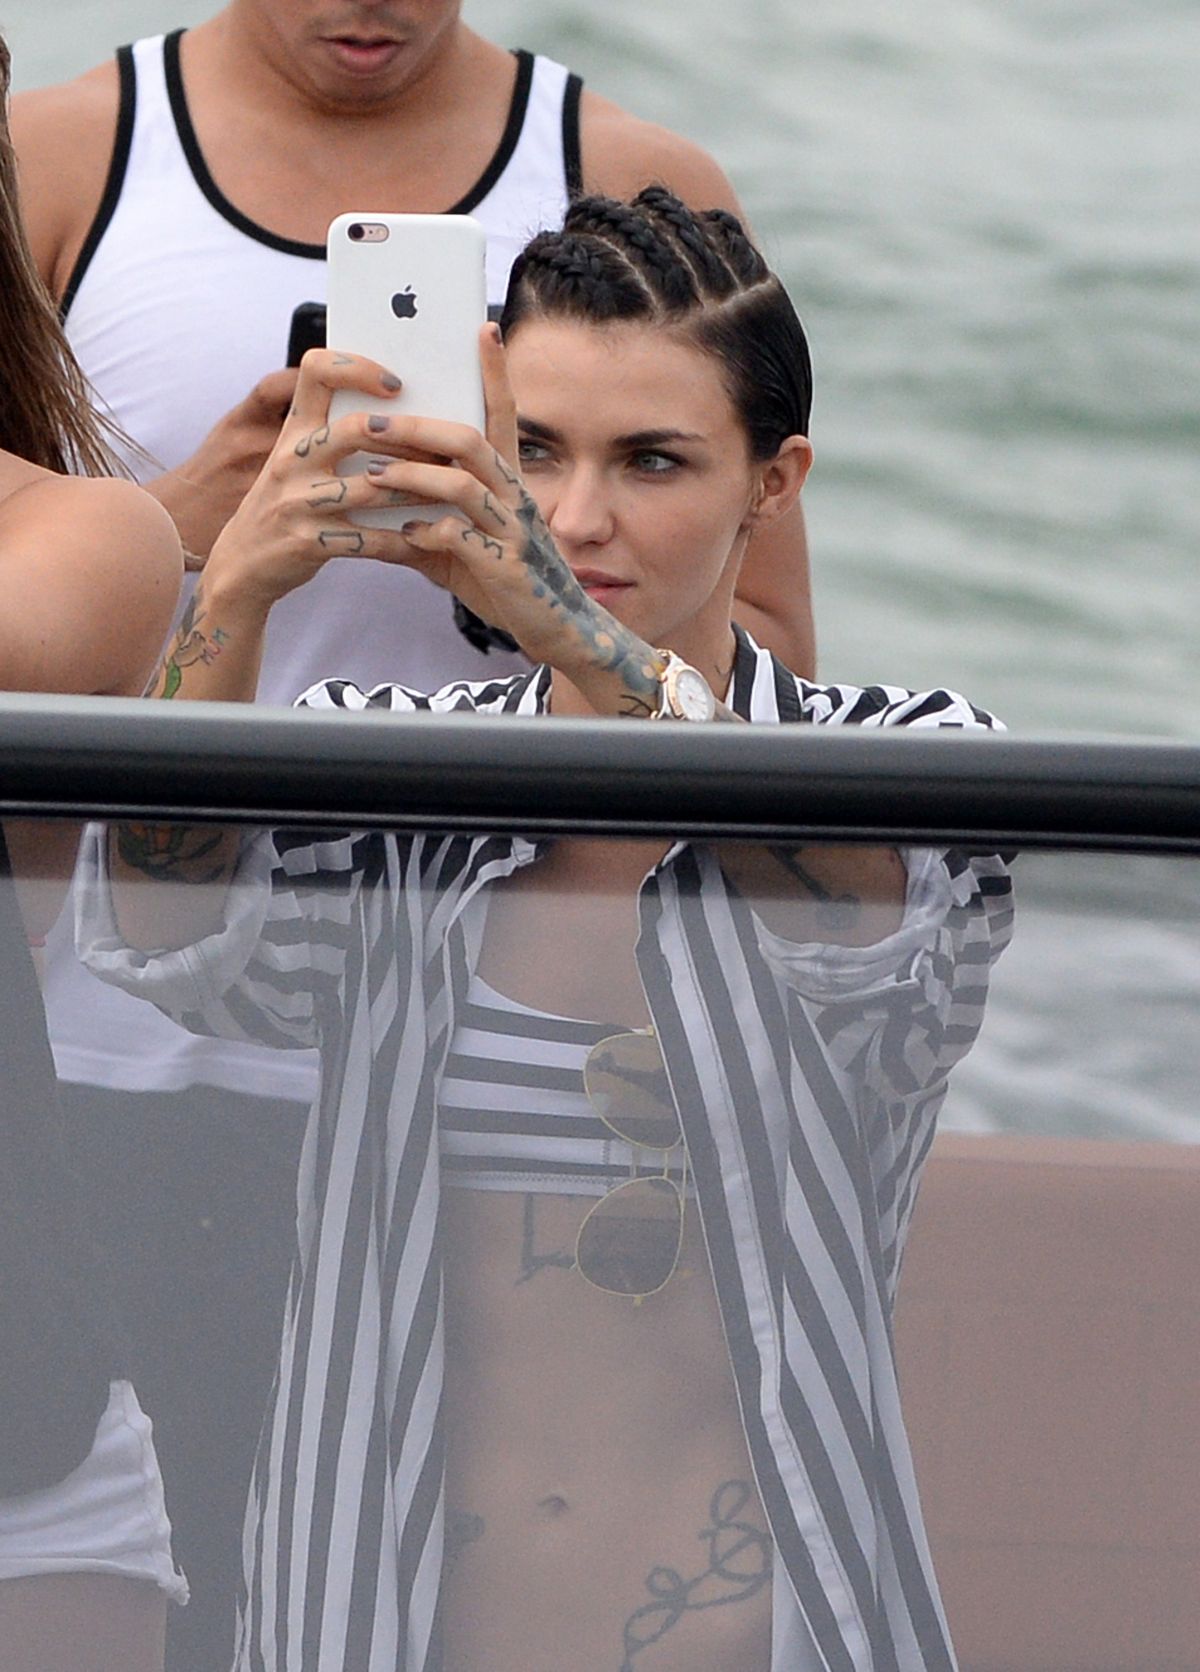 RUBY ROSE at a Boat in Miami Beach 06/05/2016 - HawtCelebs